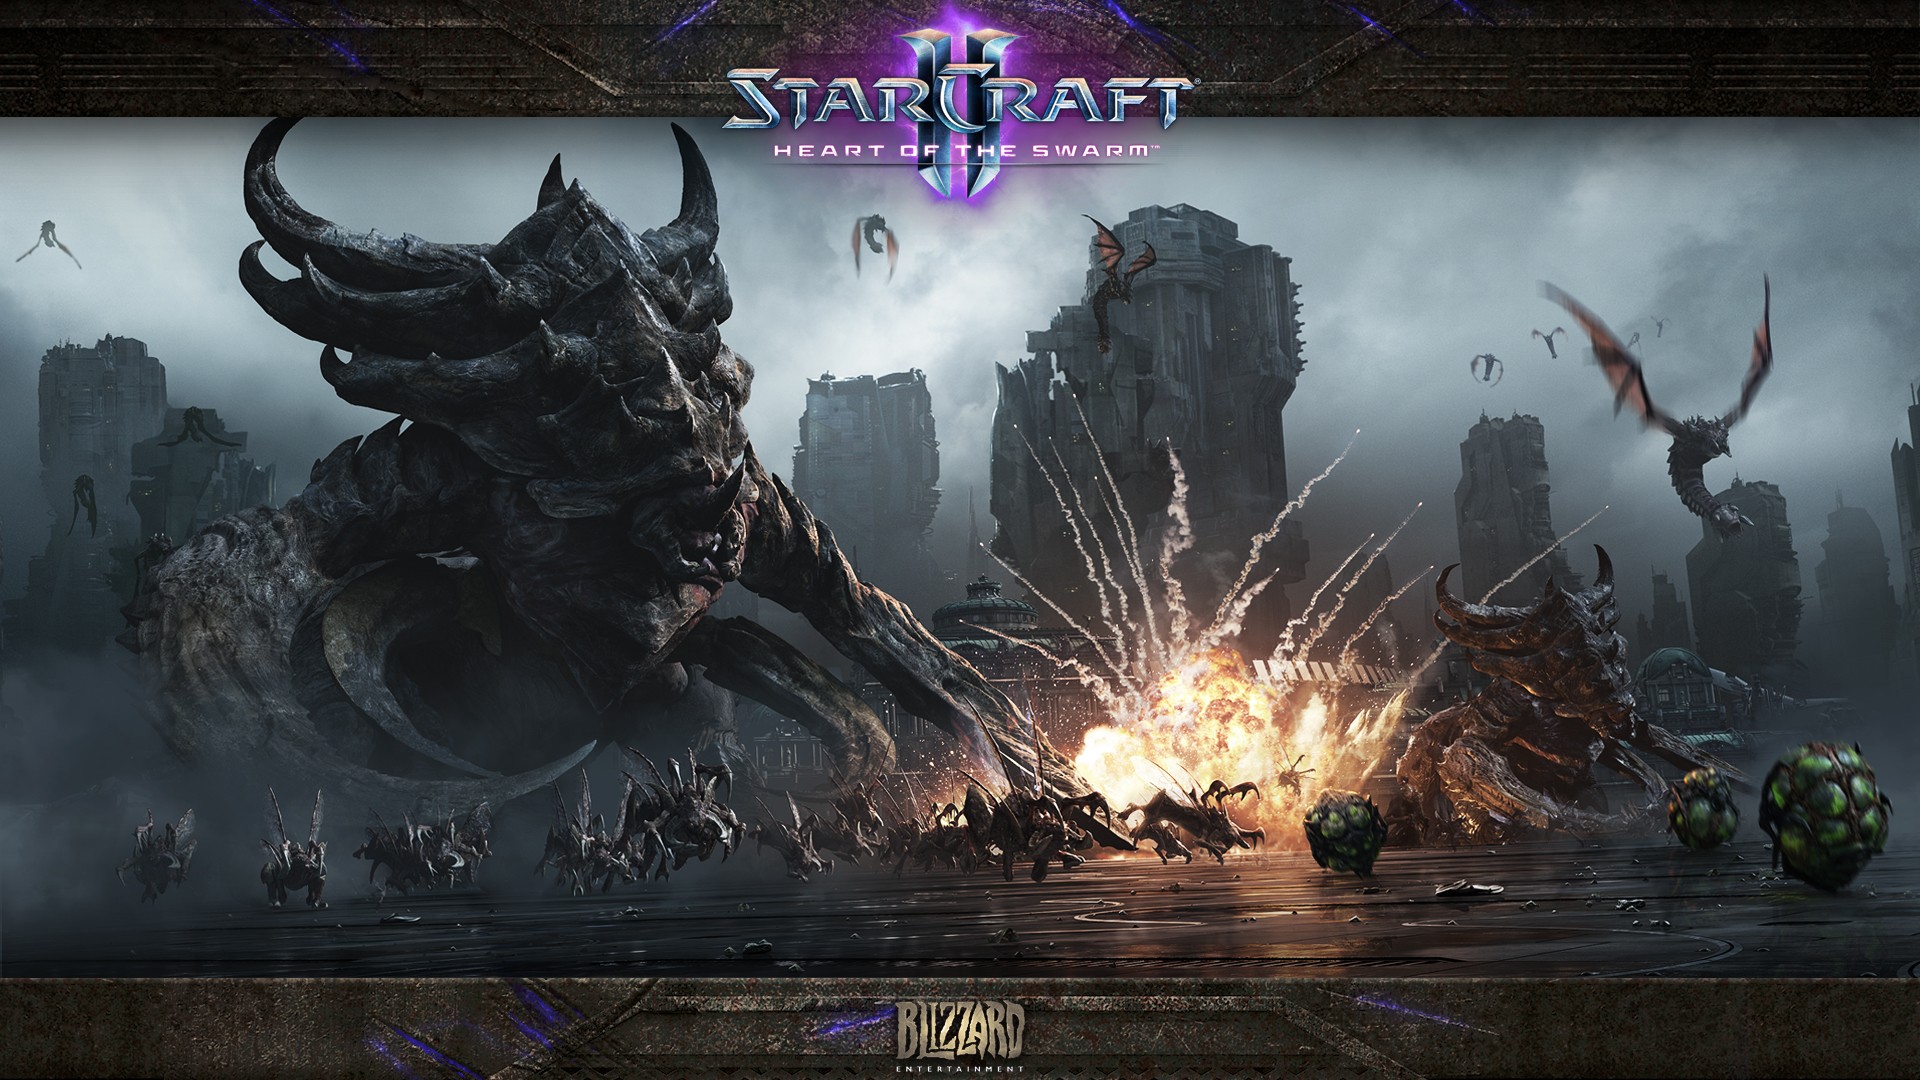 Starcraft Ii Video Games StarCraft Ii Heart Of The Swarm Blizzard Entertainment PC Gaming 1920x1080